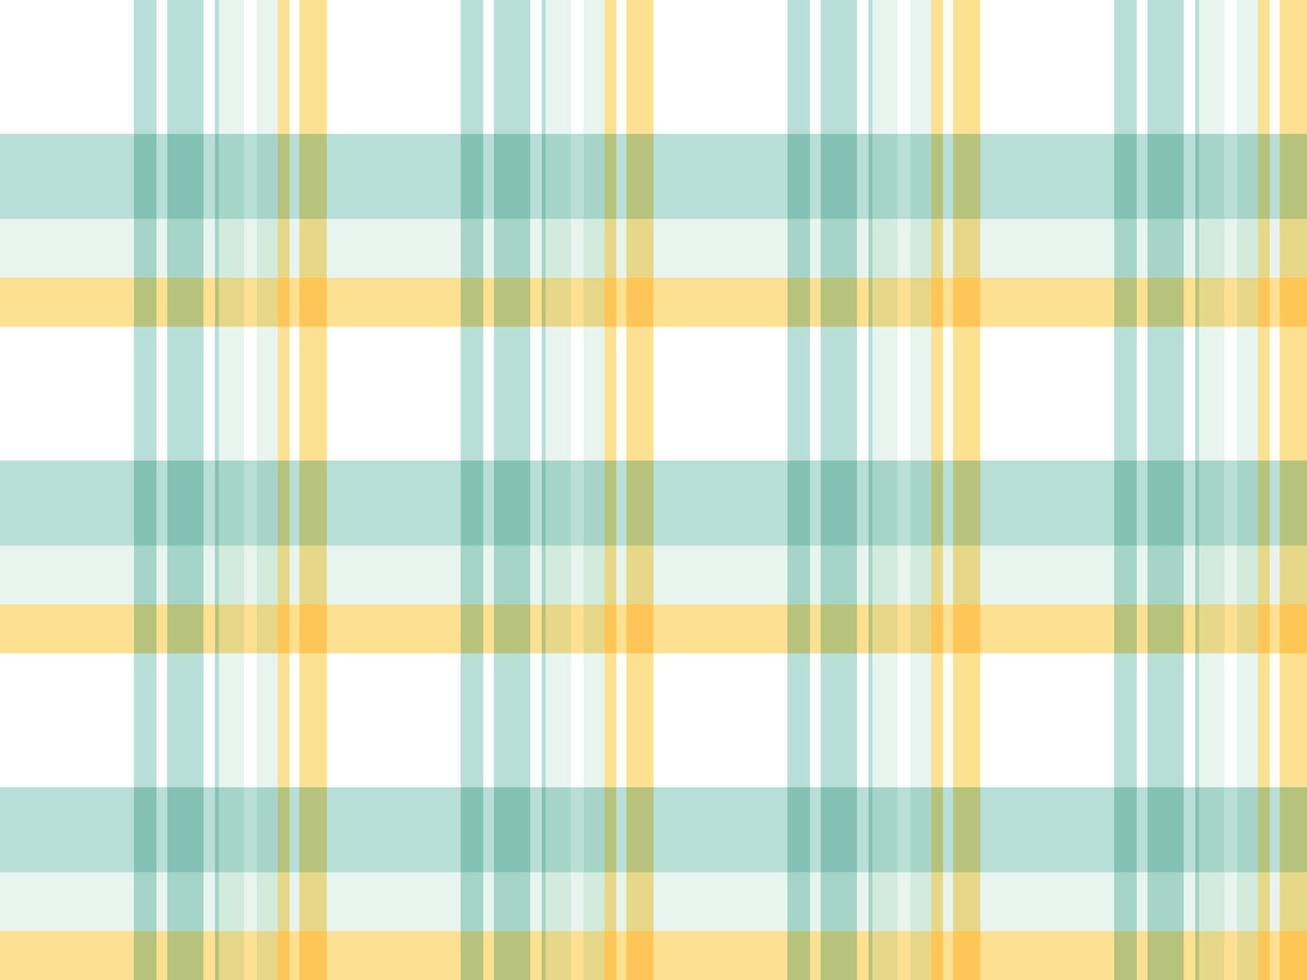 Geometric Checkered Design Abstract Madras check Pastel Color A pattern with brightly color stripes of varying thickness crossing each other to create uneven checks. Typically used on shirts. vector